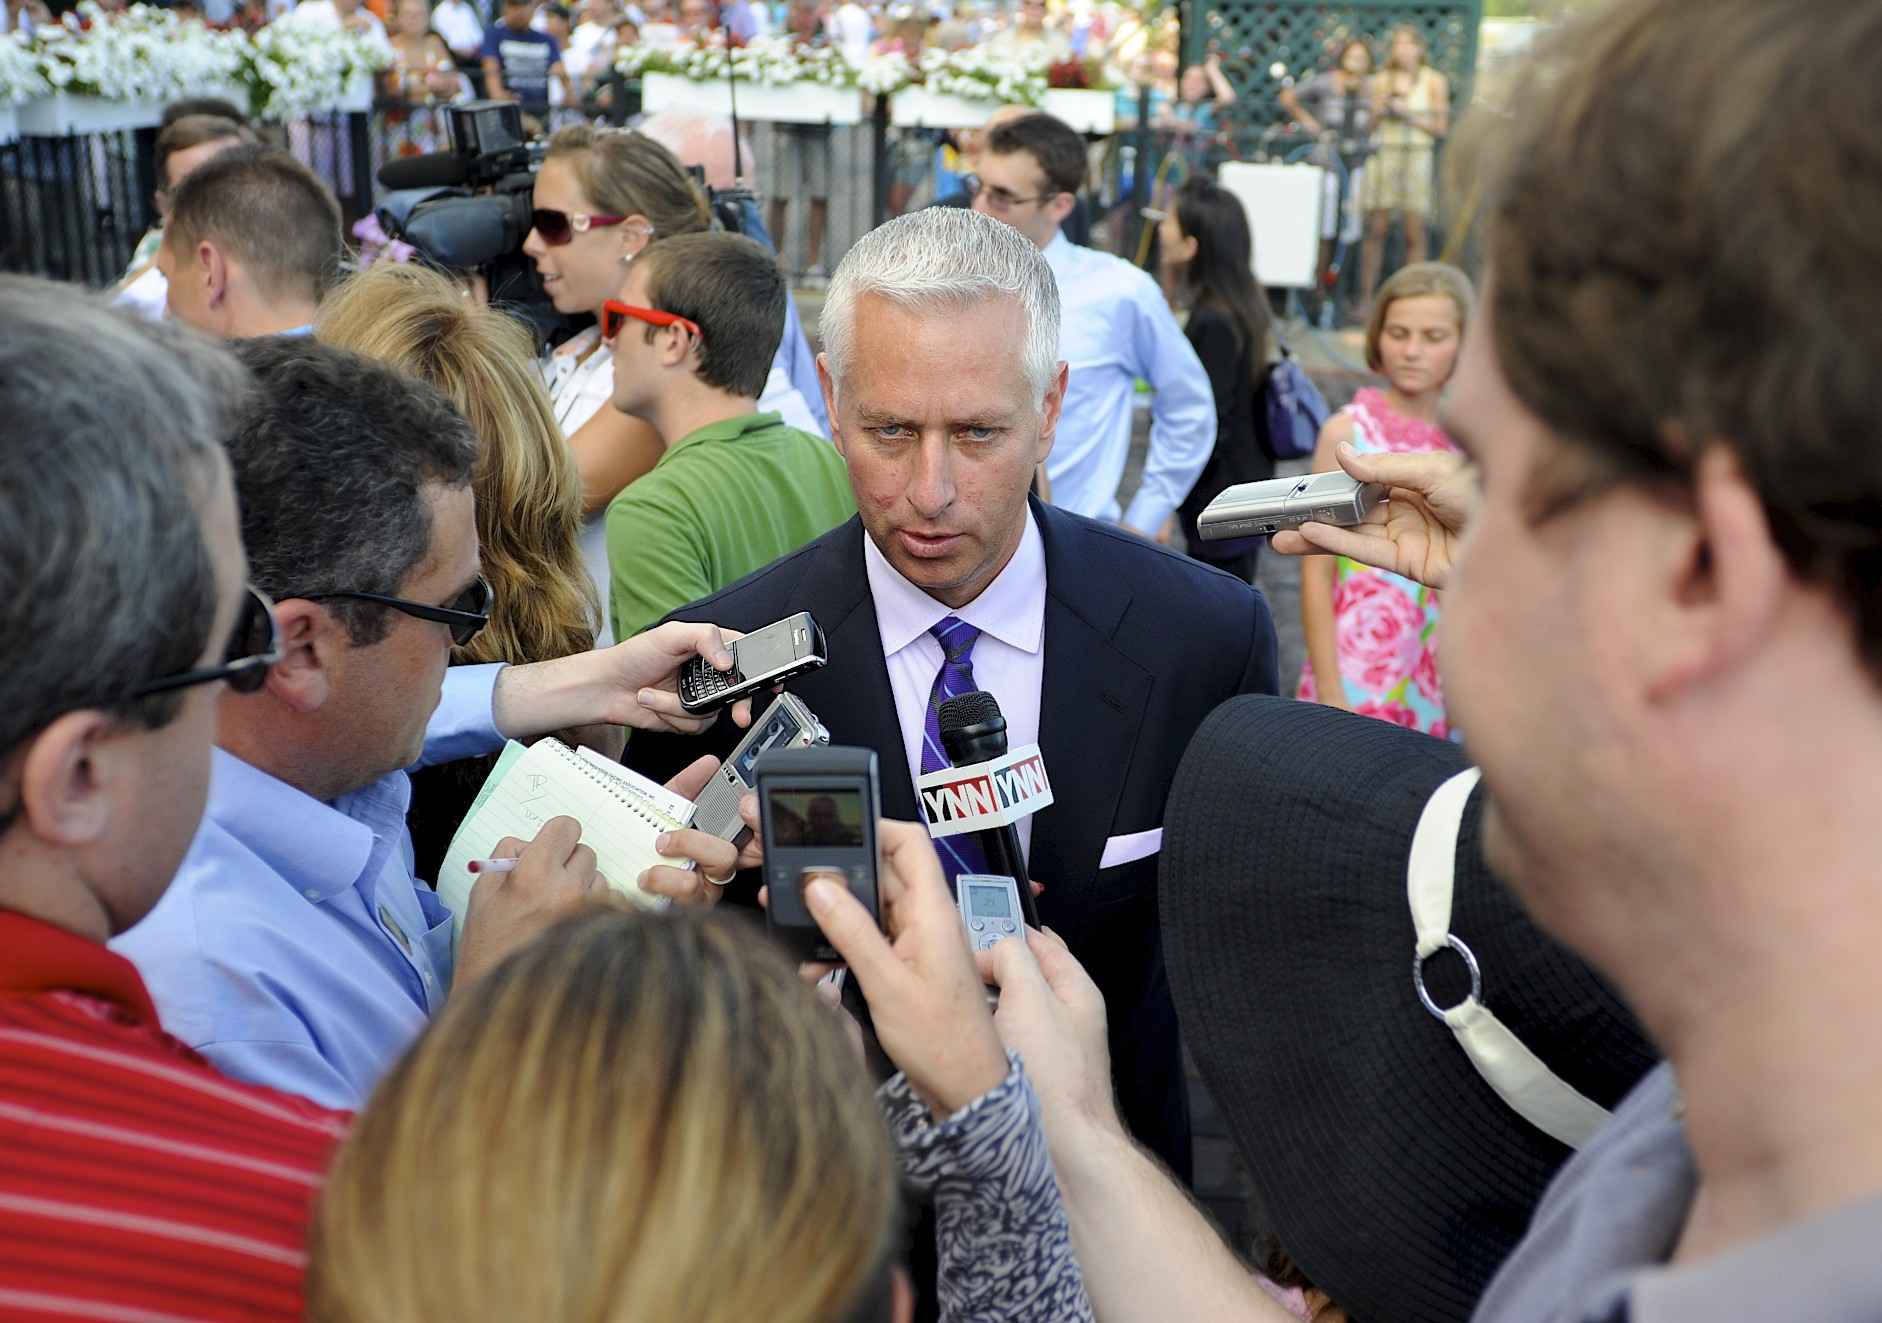 Todd Pletcher at Saratoga Race Course, 2011 (Bob Mayberger/Museum Collection)